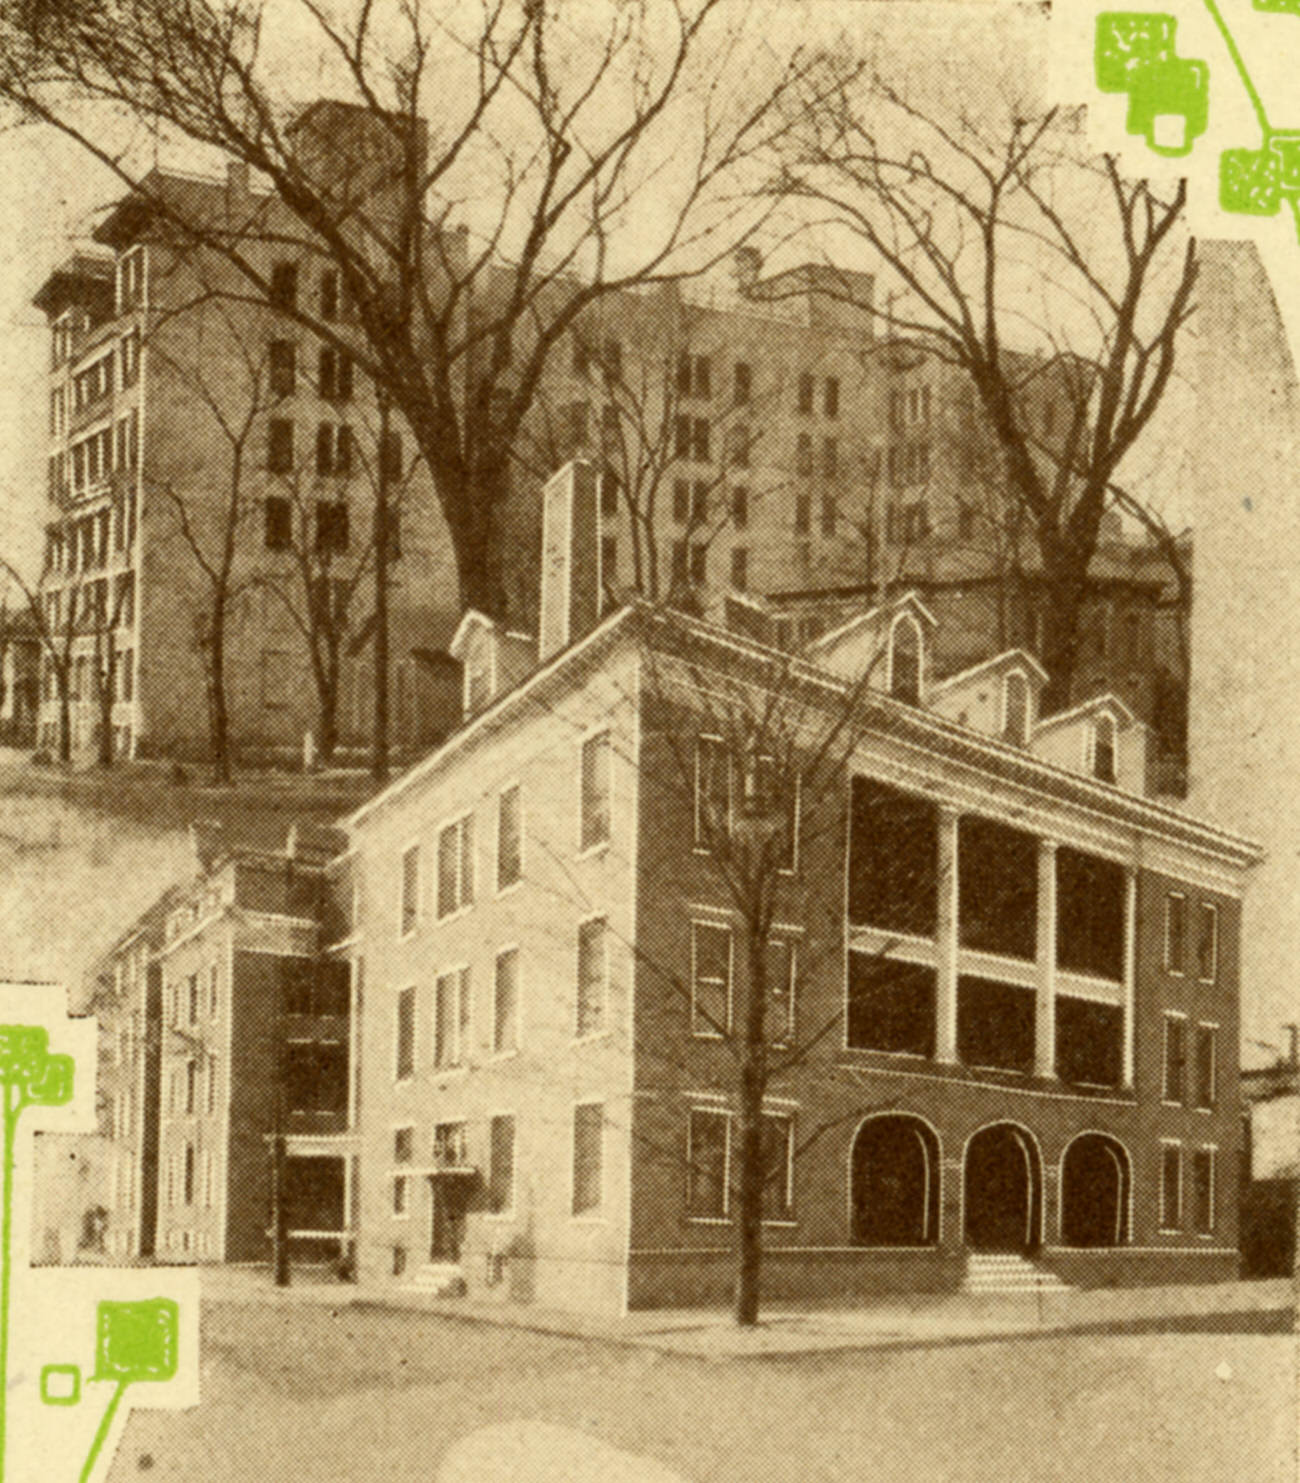 Grant Hospital and its Annex, founded in 1900 by Dr. James F. Baldwin, Circa 1915.